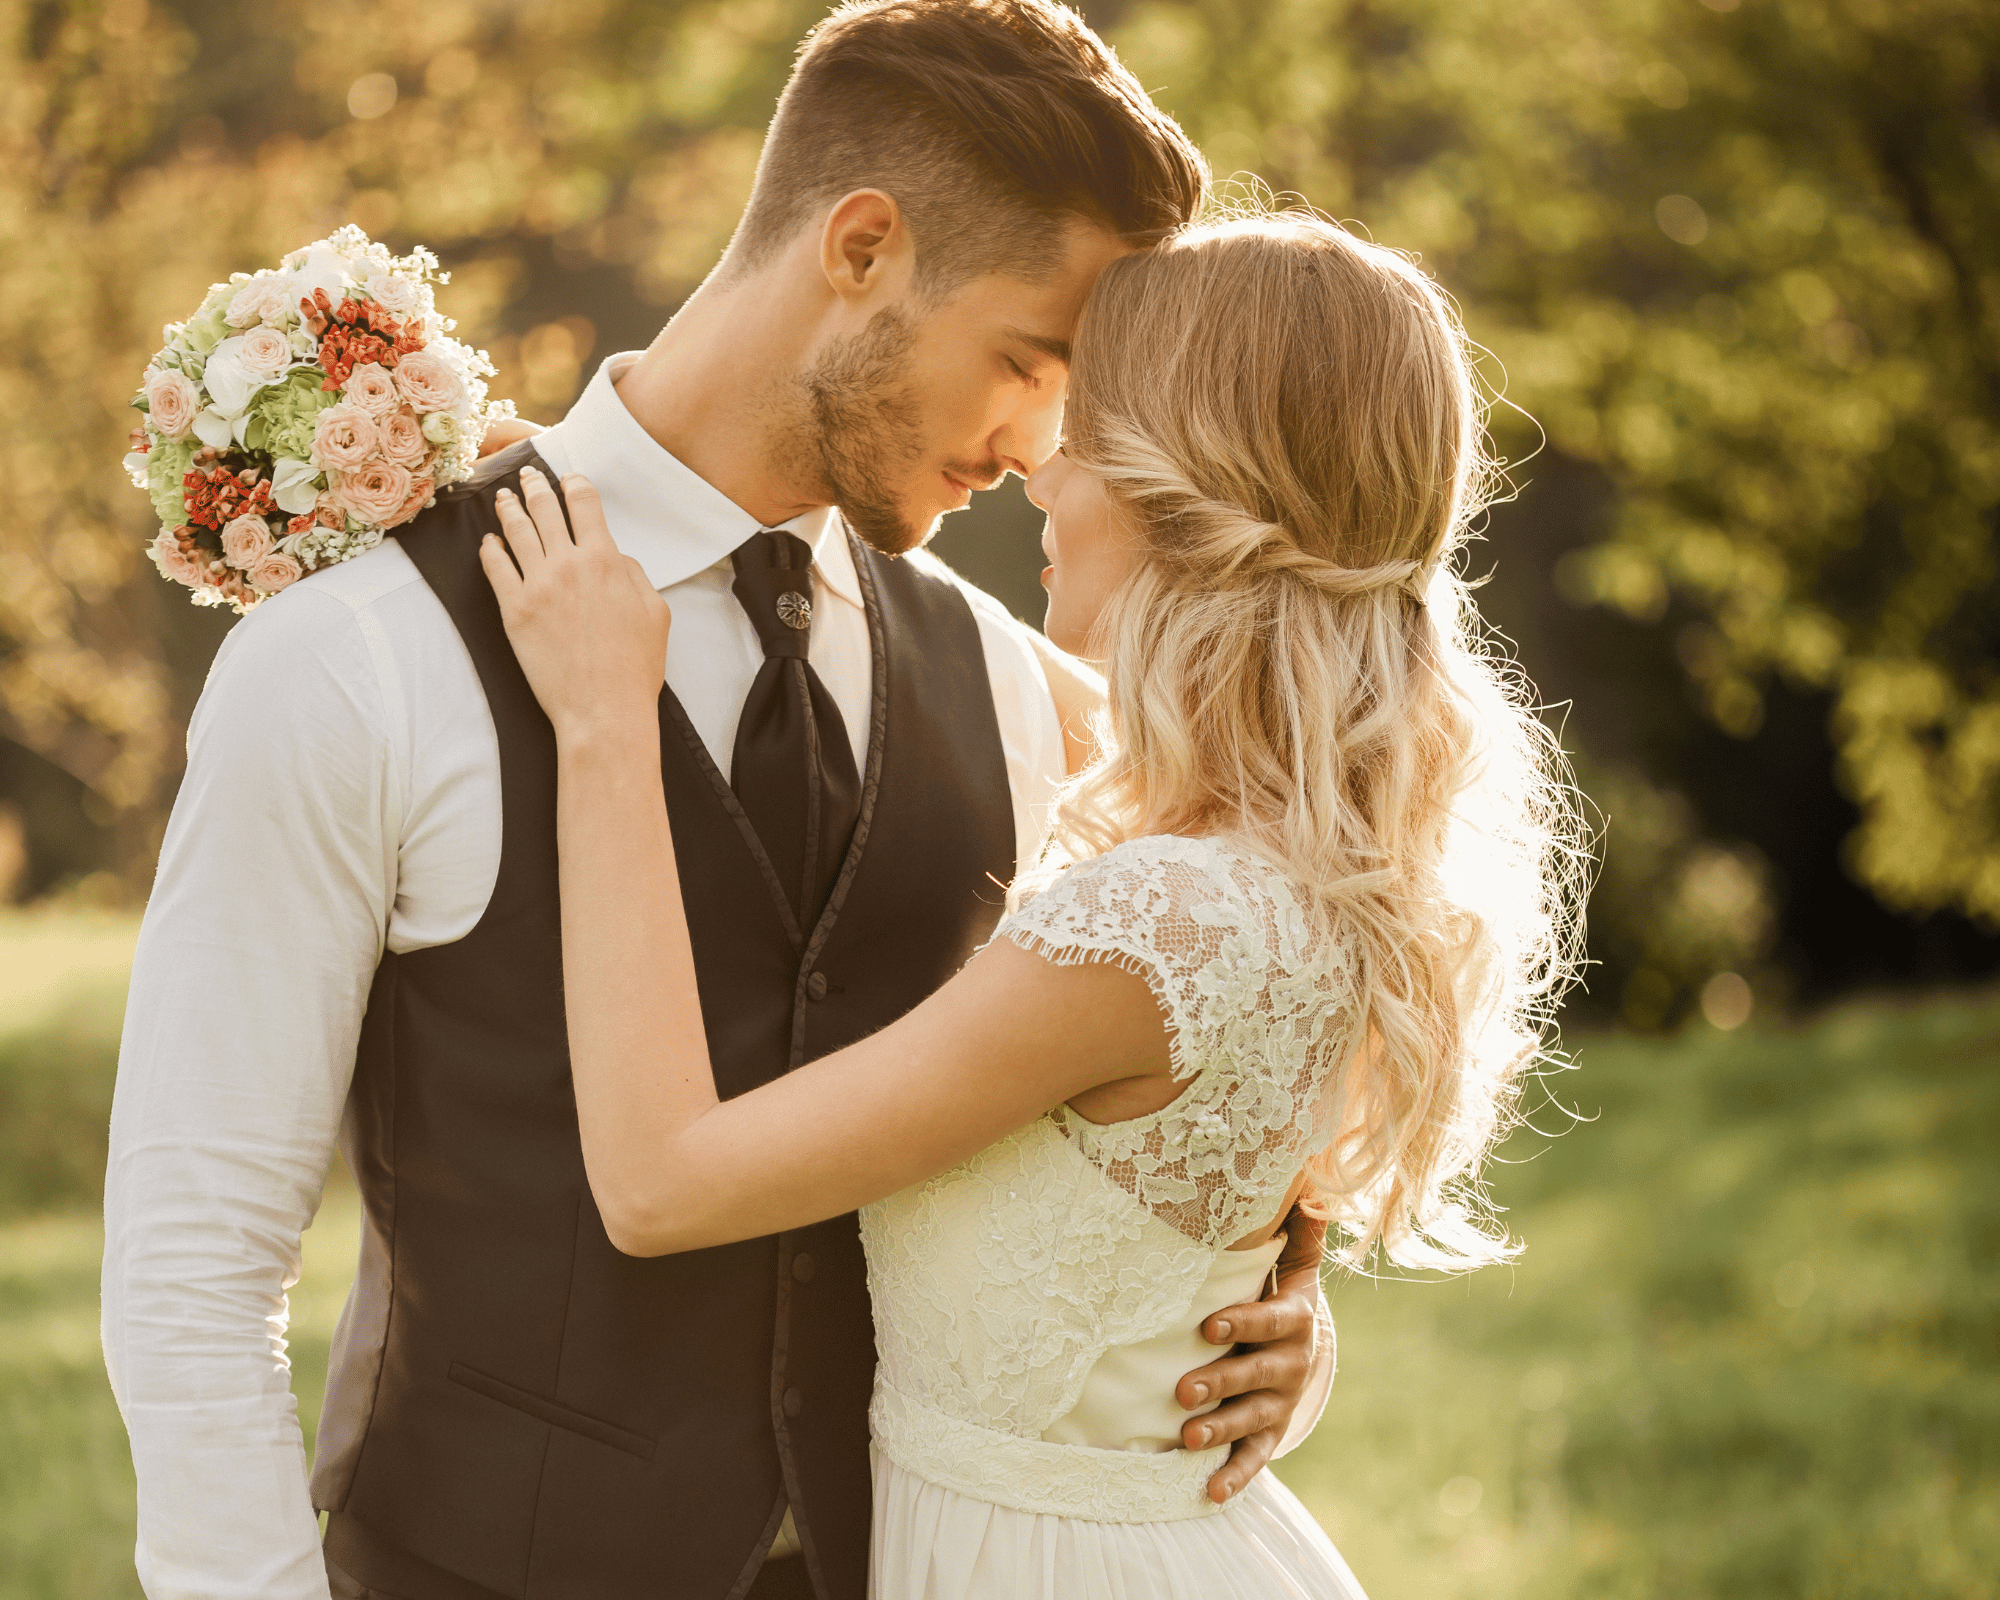 Wedding Symbolism: What Does It represent?